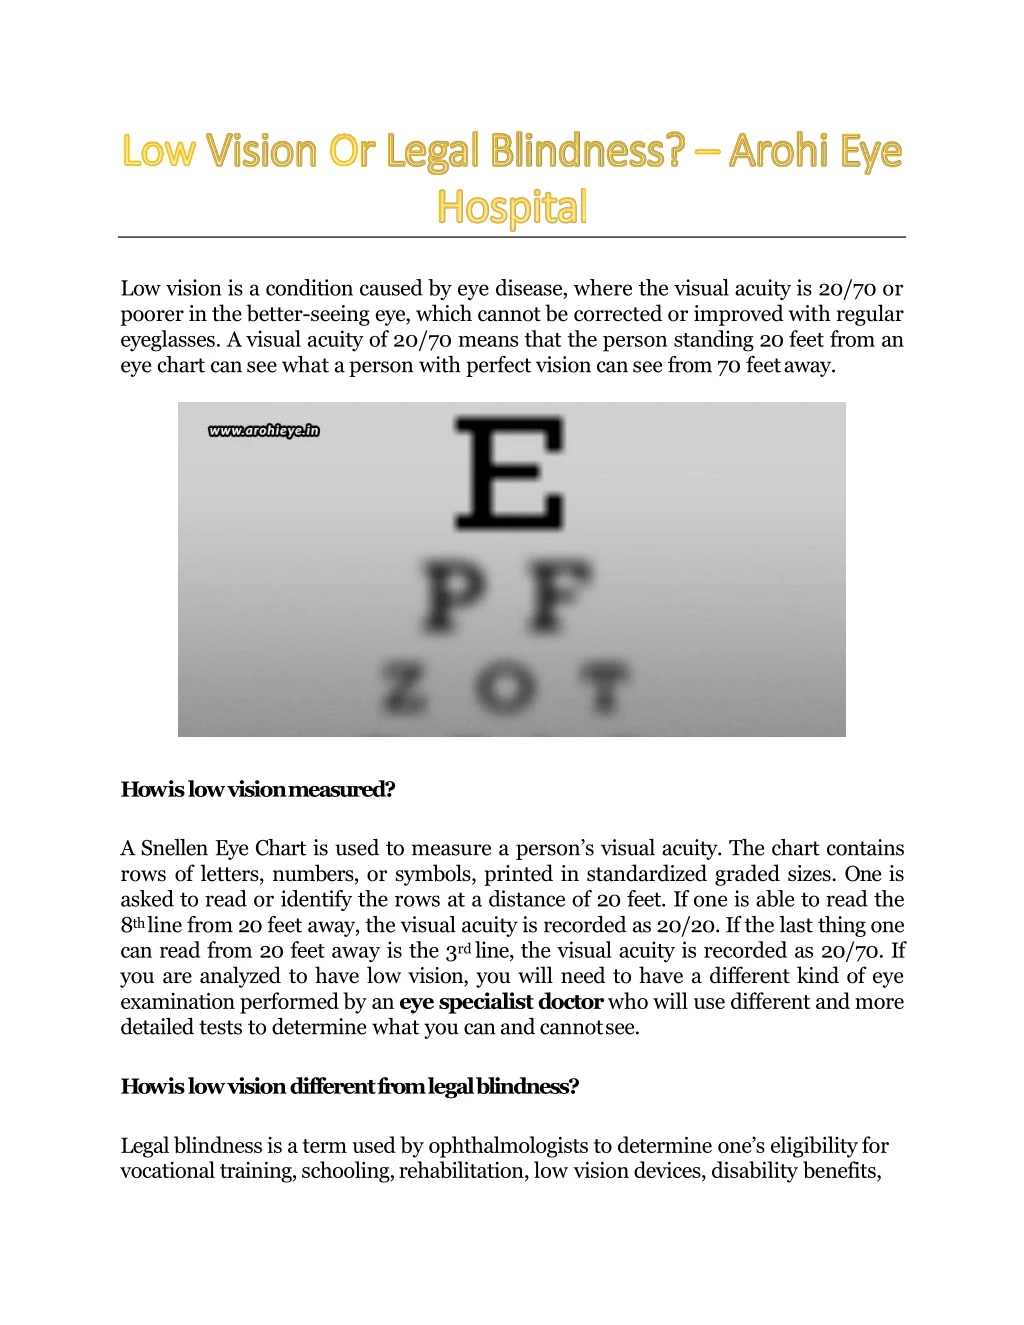 low vision is a condition caused by eye disease